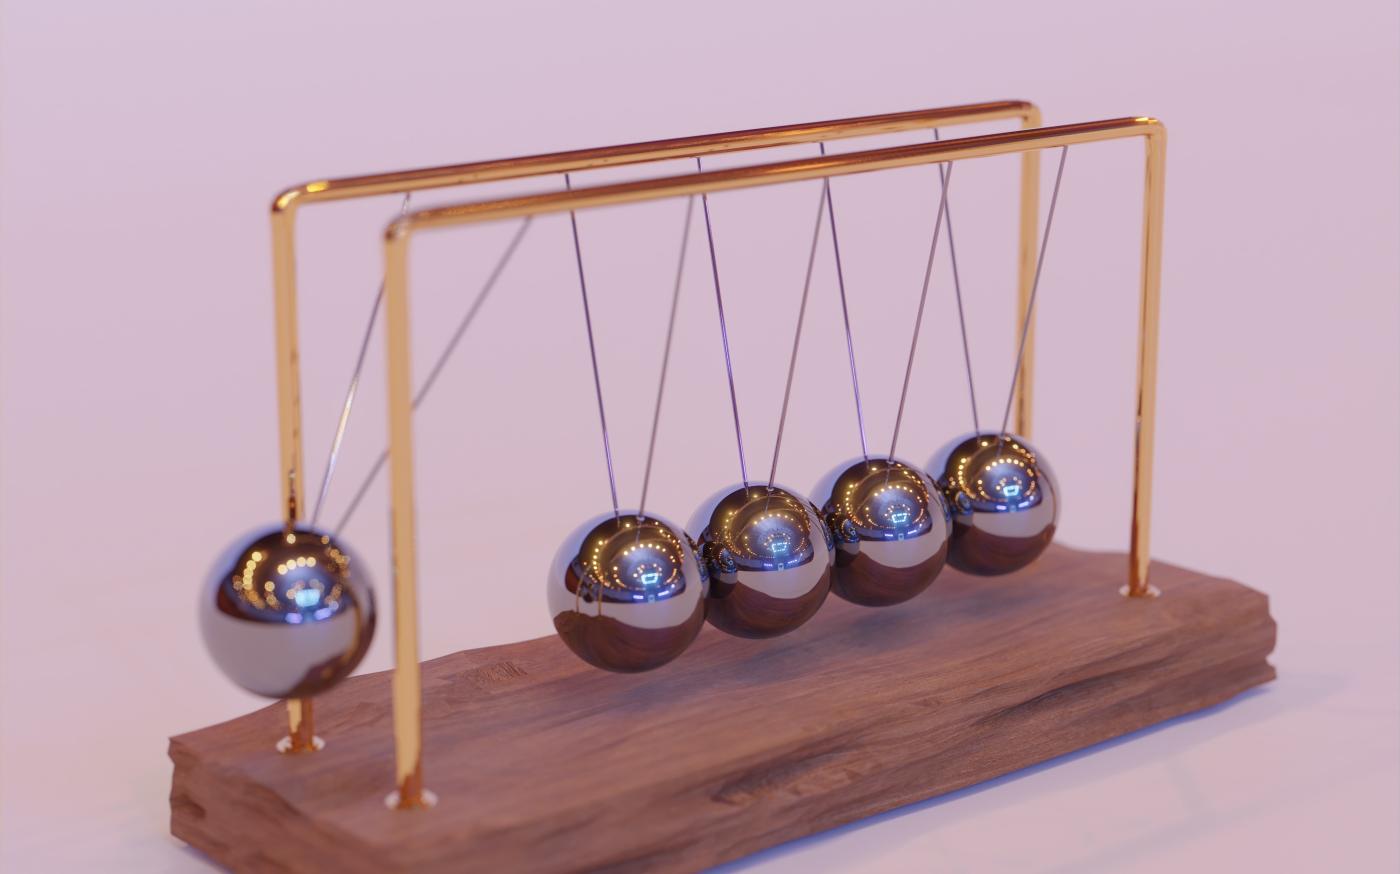 a wooden stand with three metal balls on it by Sunder Muthukumaran courtesy of Unsplash.